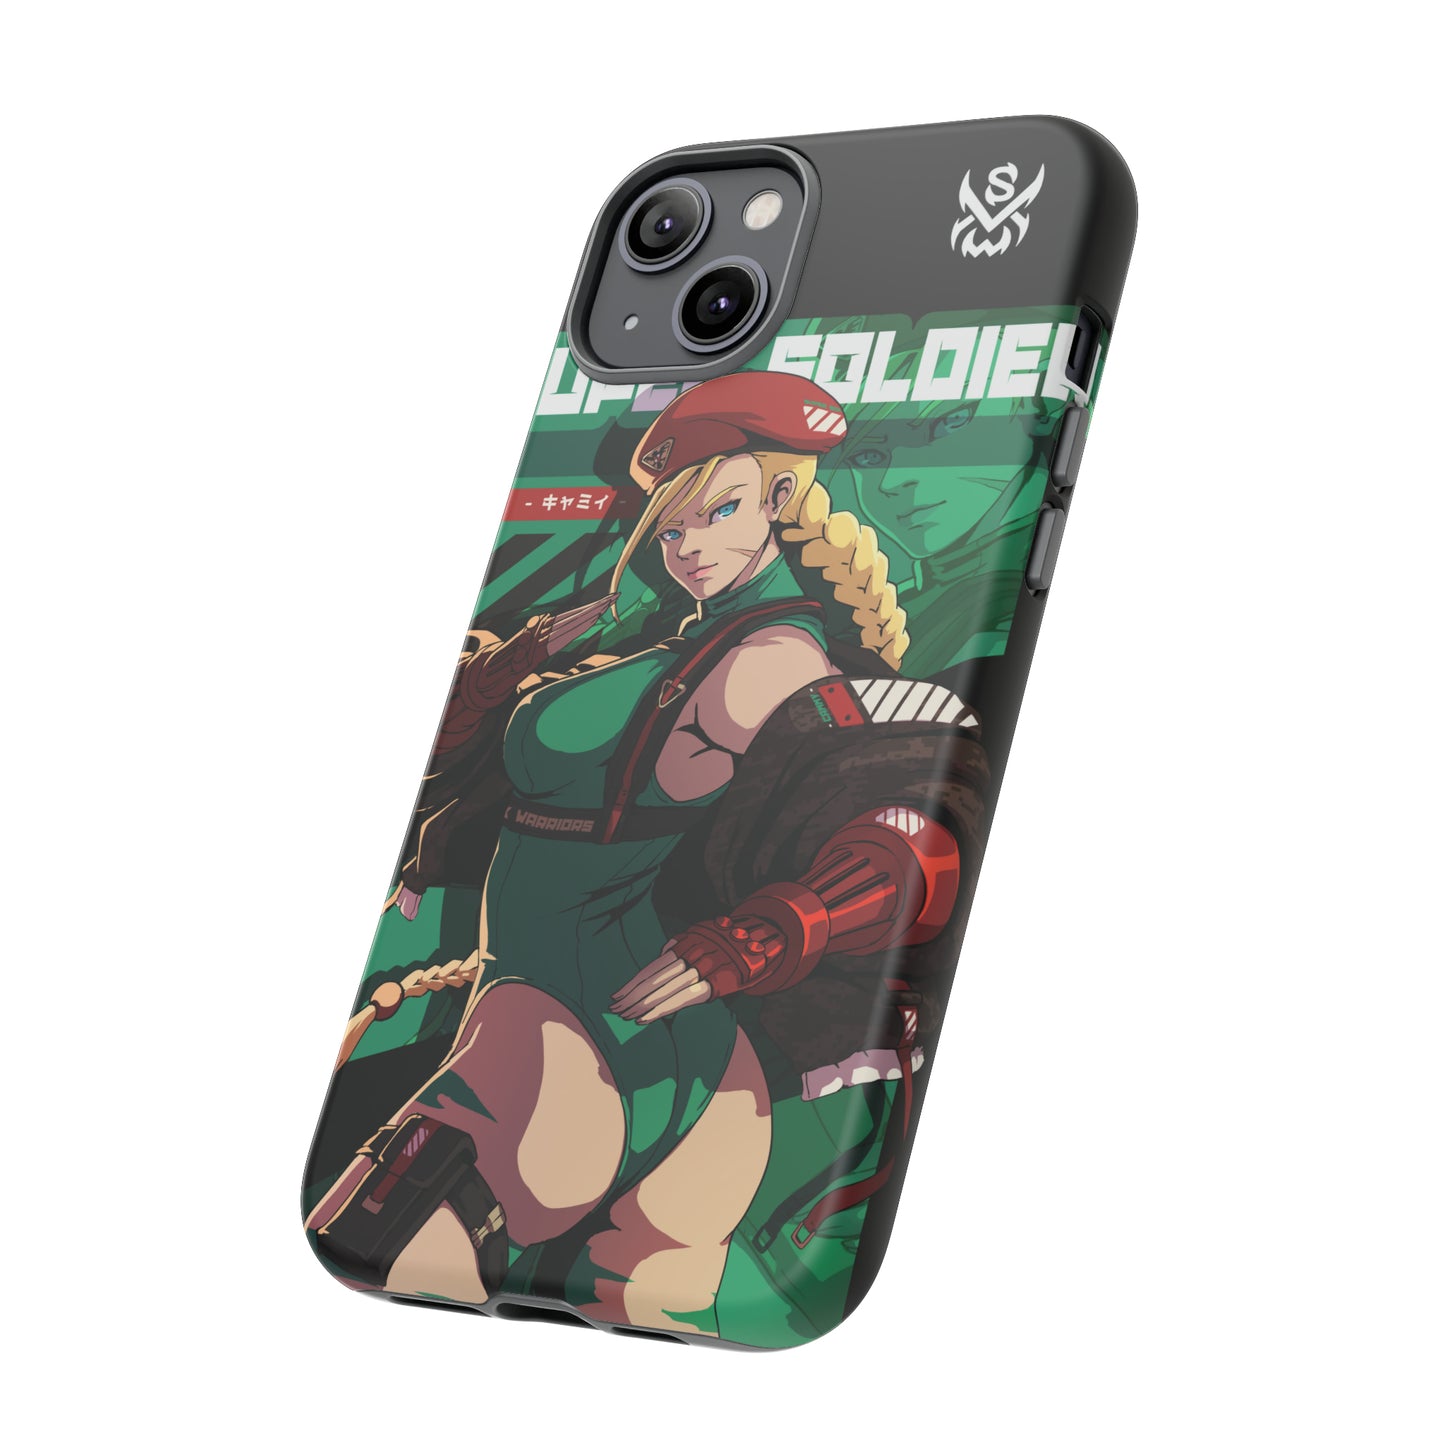 Super Soldier / iPhone Case - LIMITED